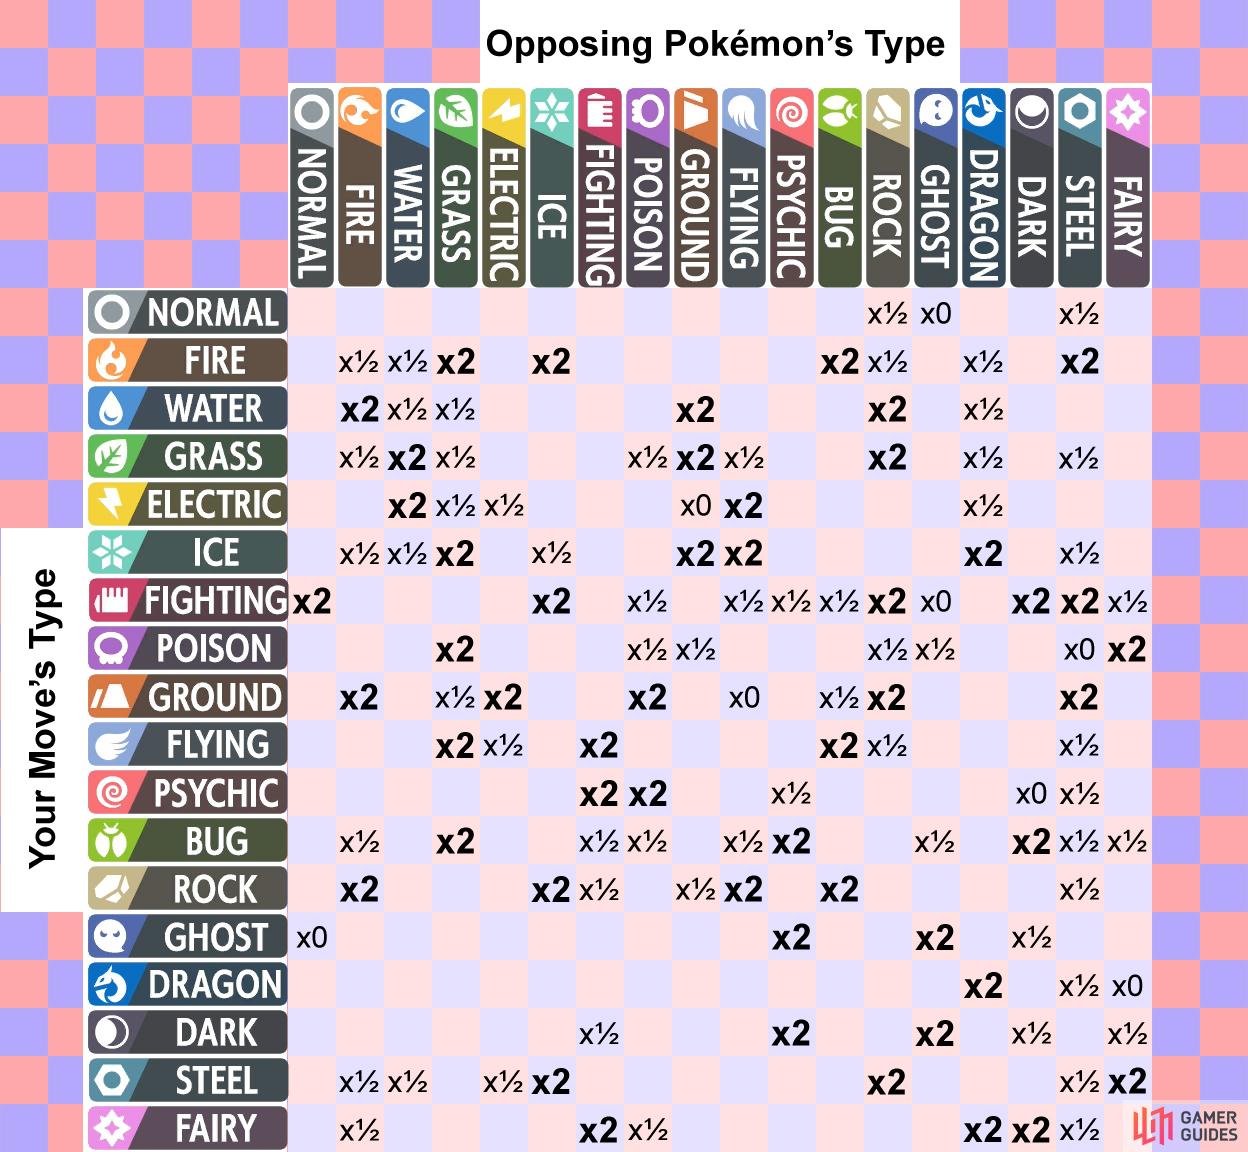 Sword/Shield Exclusives. Handy chart for tracking. : r/pokemon